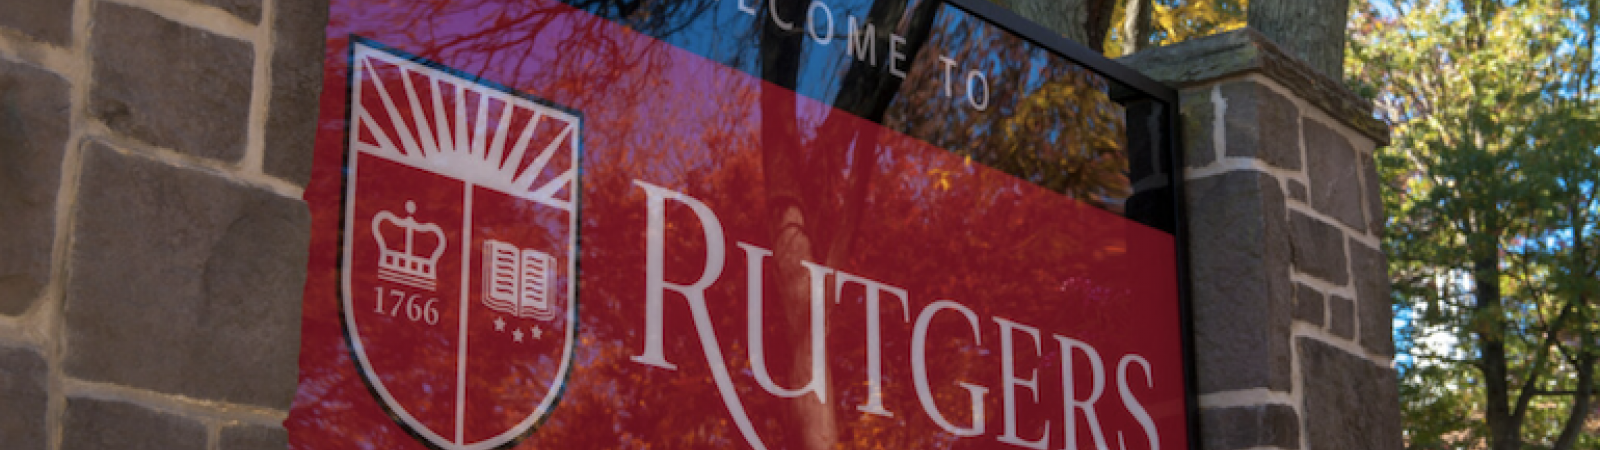 "Welcome to Rutgers" sign on the New Brunswick campus